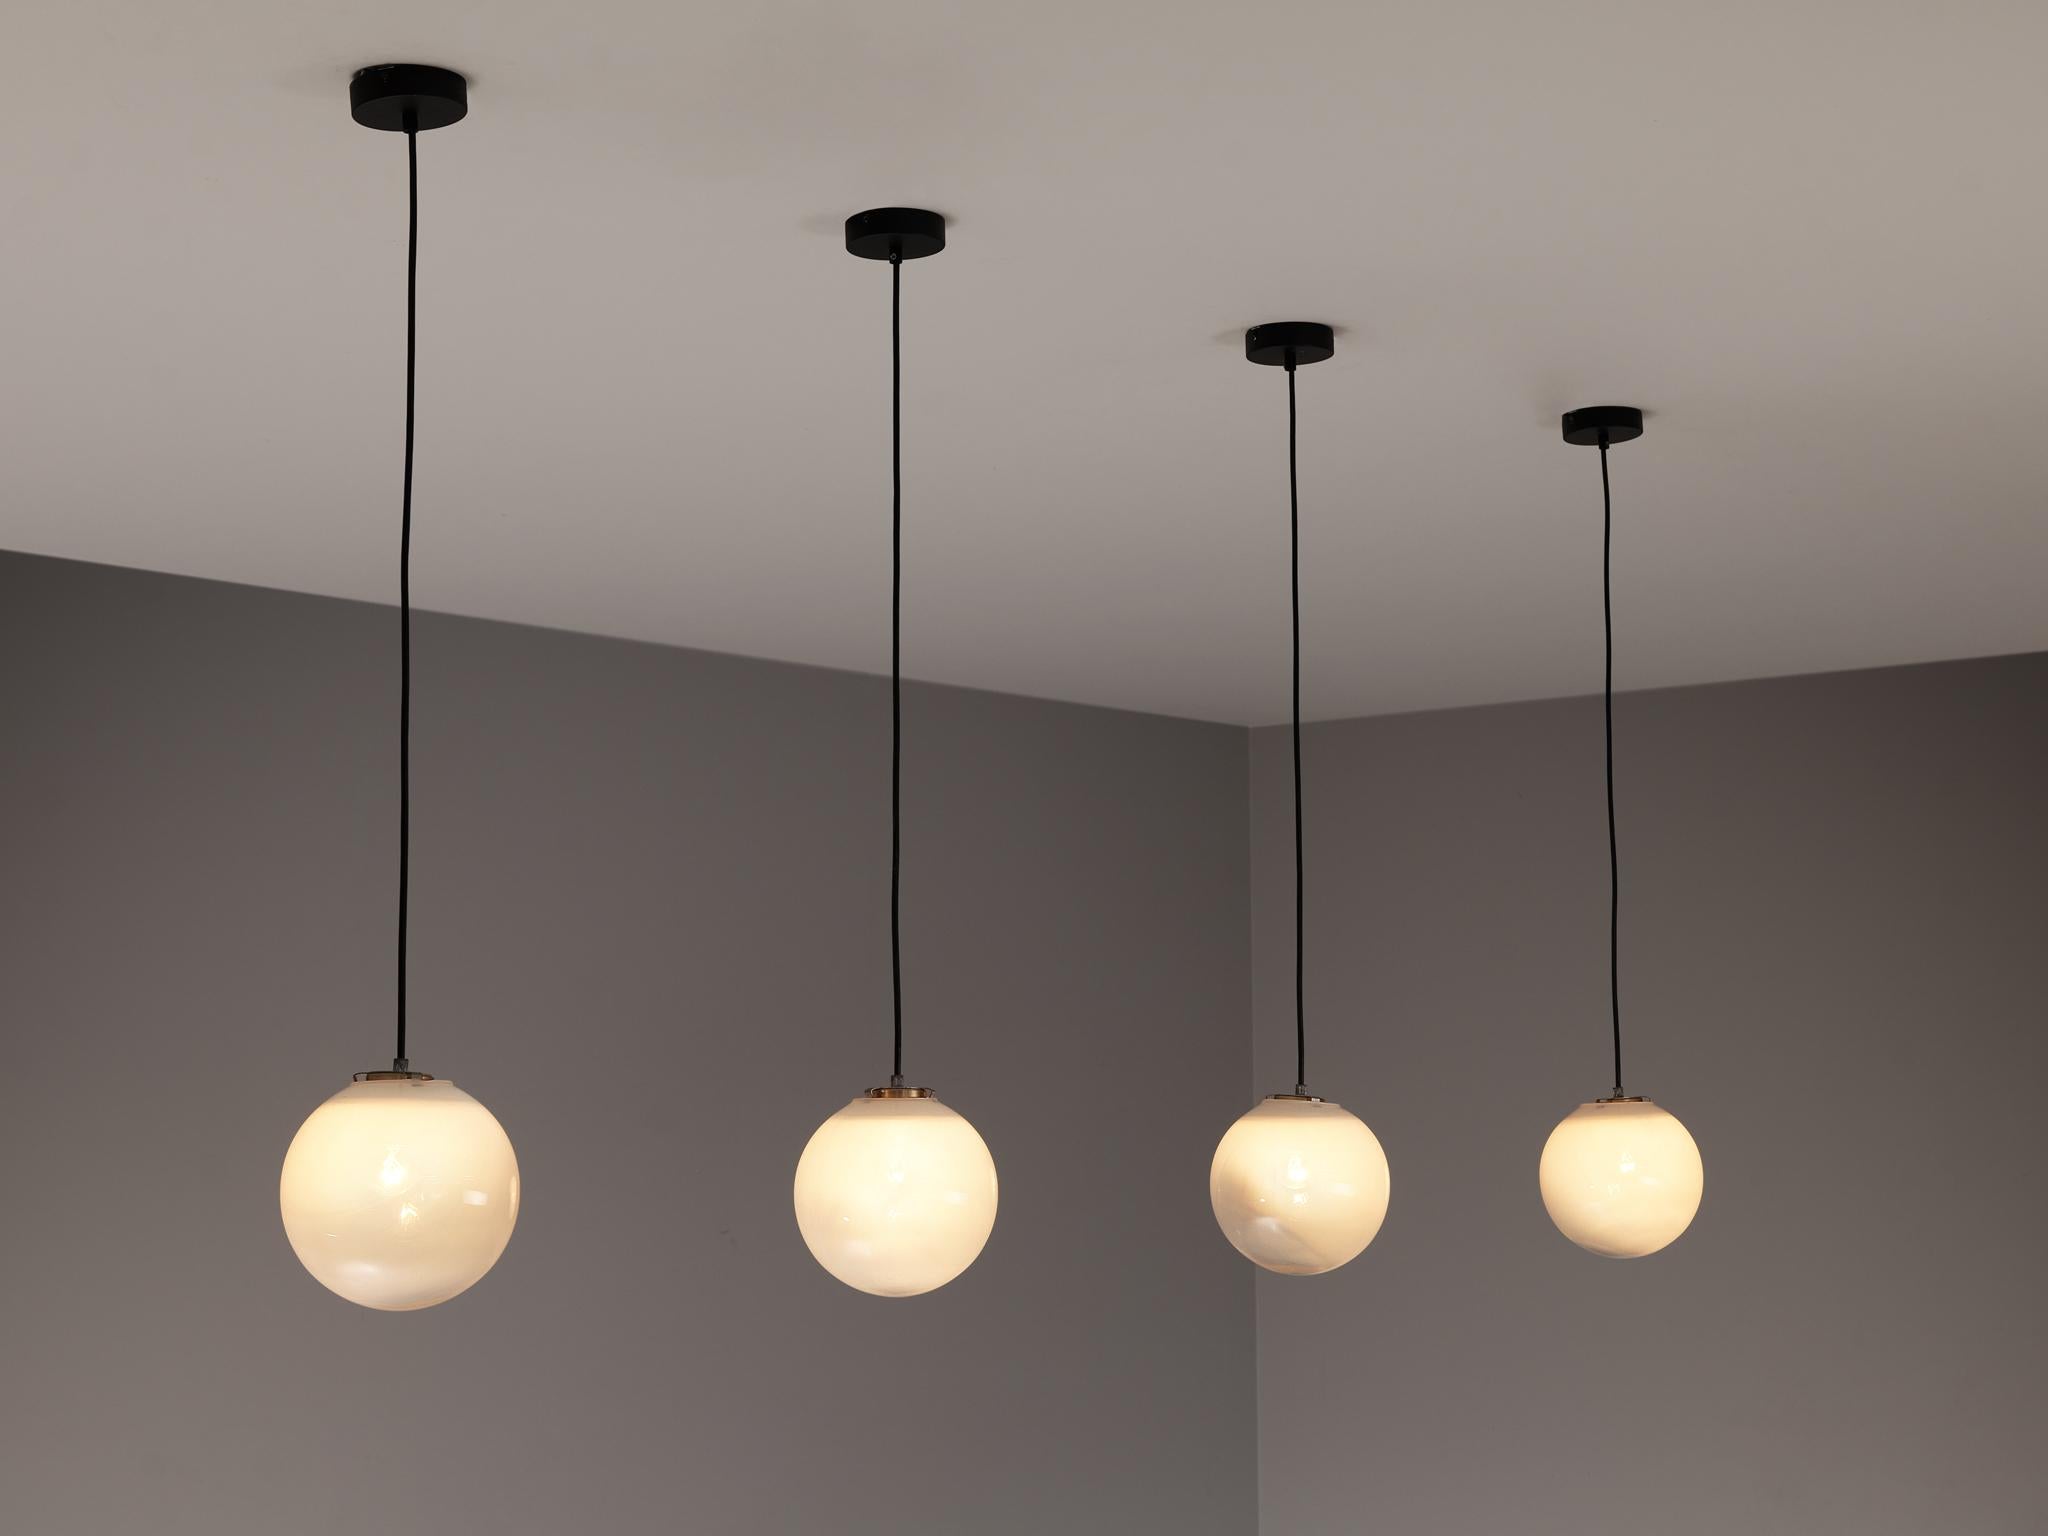 Pendants, opaline glass, metal, plastic, Europe, 1960s.

These atmospheric pendant lamps features each an opaline to clear glass orb. This results in a nice and soft light-tone creating a lively ambience in the room. The lamps can be hung above a